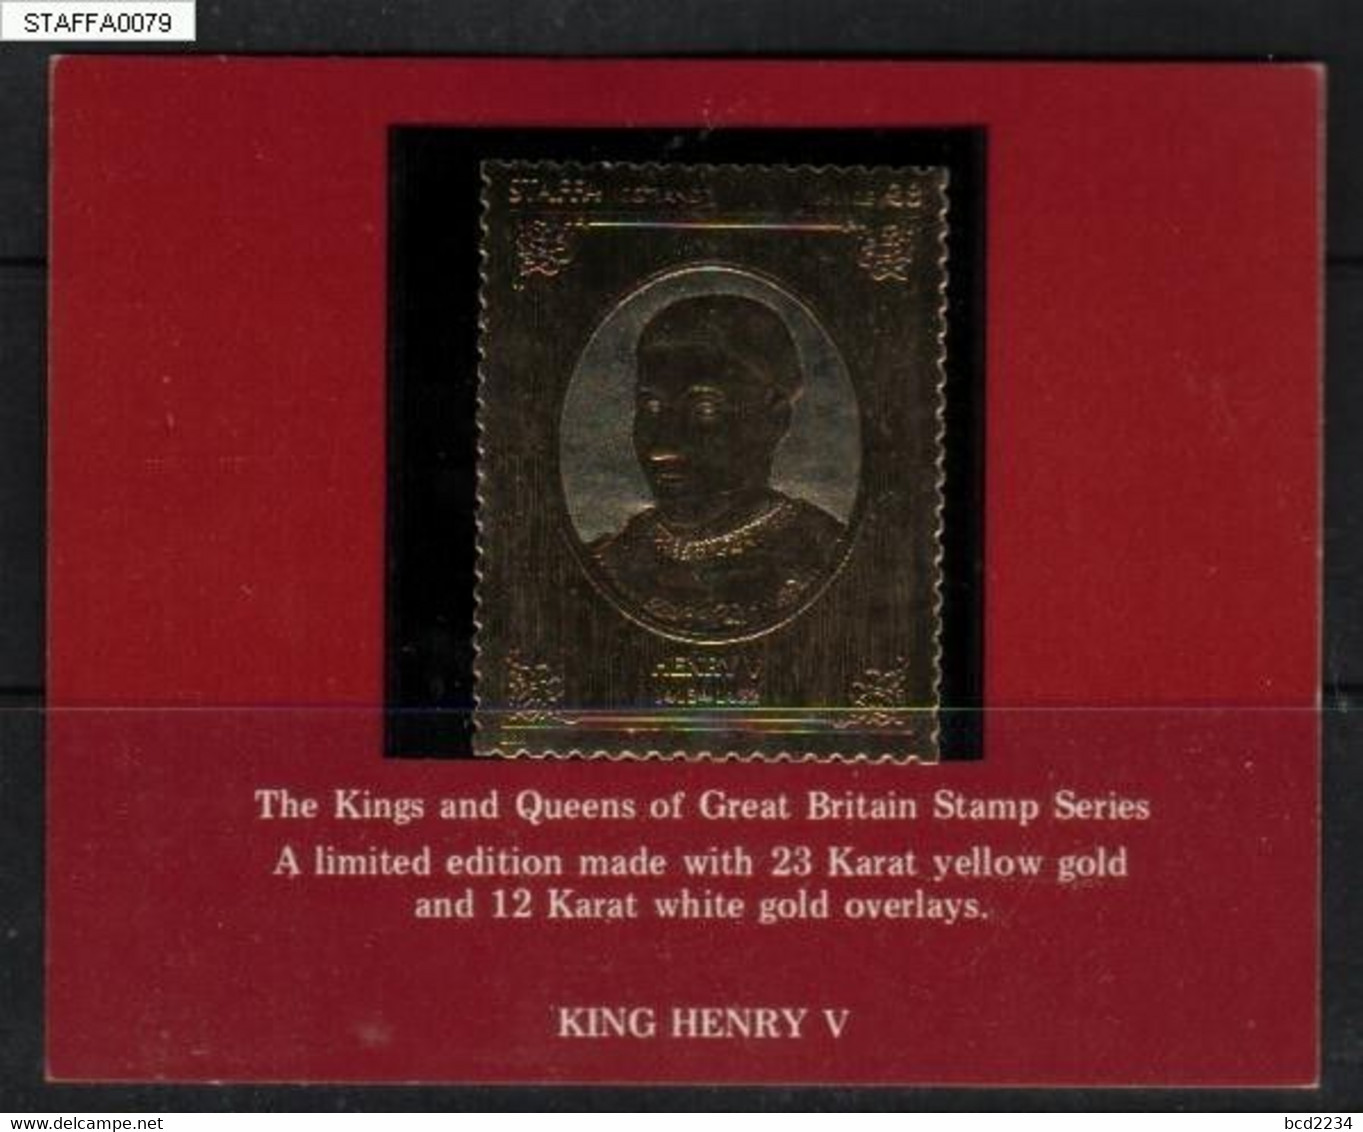 GB STAFFA £8 GOLD 23 KARAT FOIL KINGS QUEENS OF GREAT BRITAIN KING HENRY V LOCALS ROYALS ROYALTIES ISLAND SCOTLAND - Local Issues